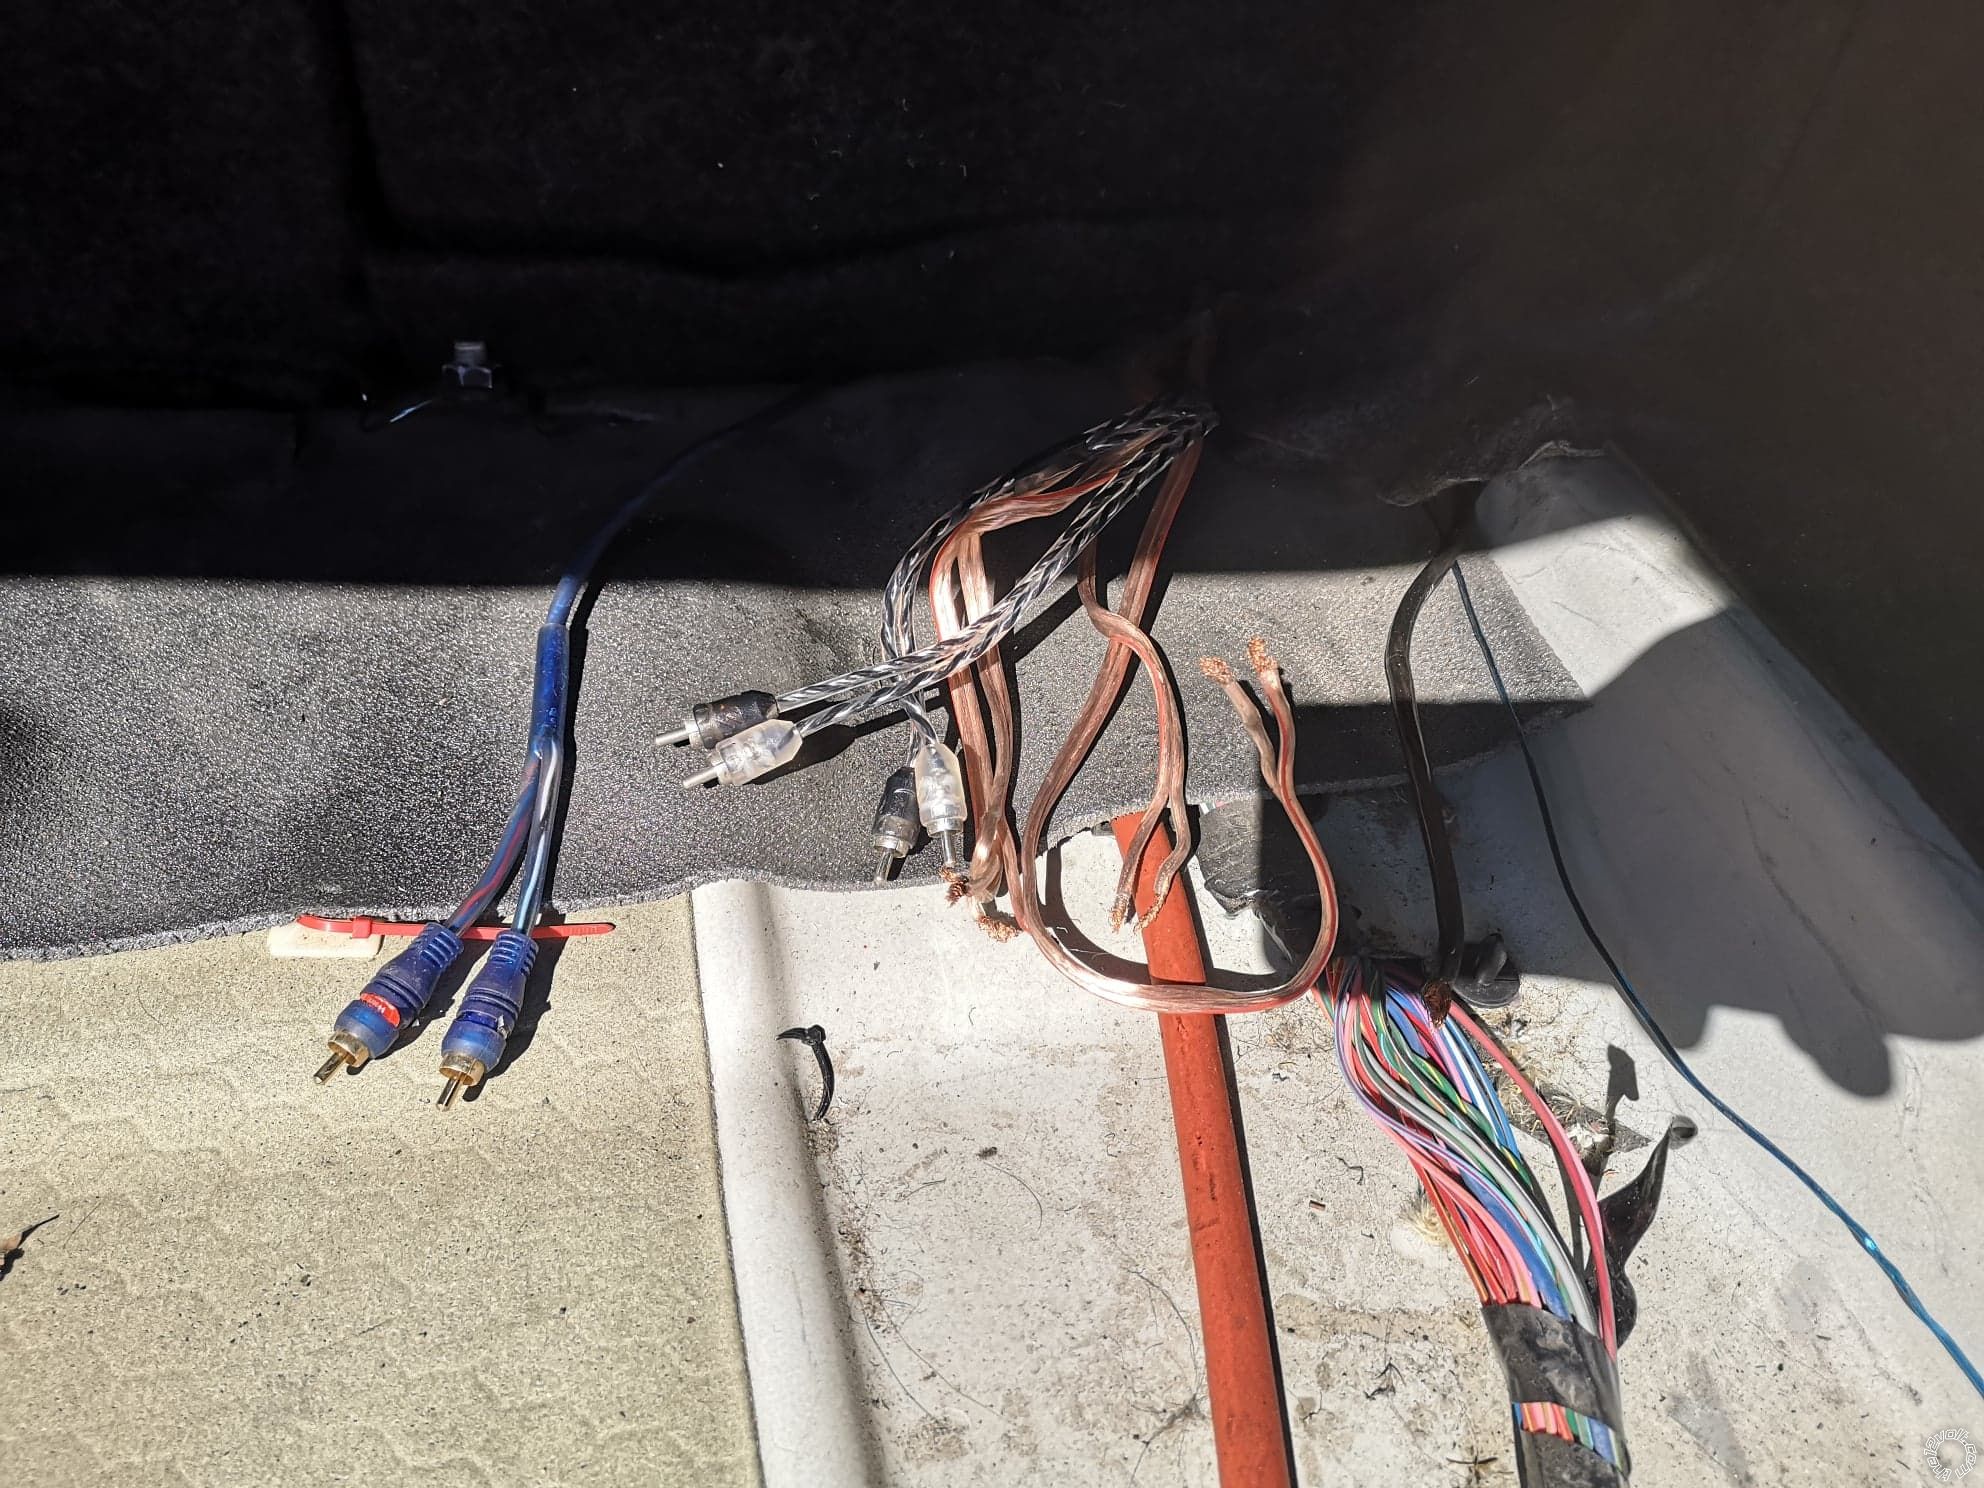 Wiring Speakers in a Chrysler 300, No Amp, No Sub - Last Post -- posted image.